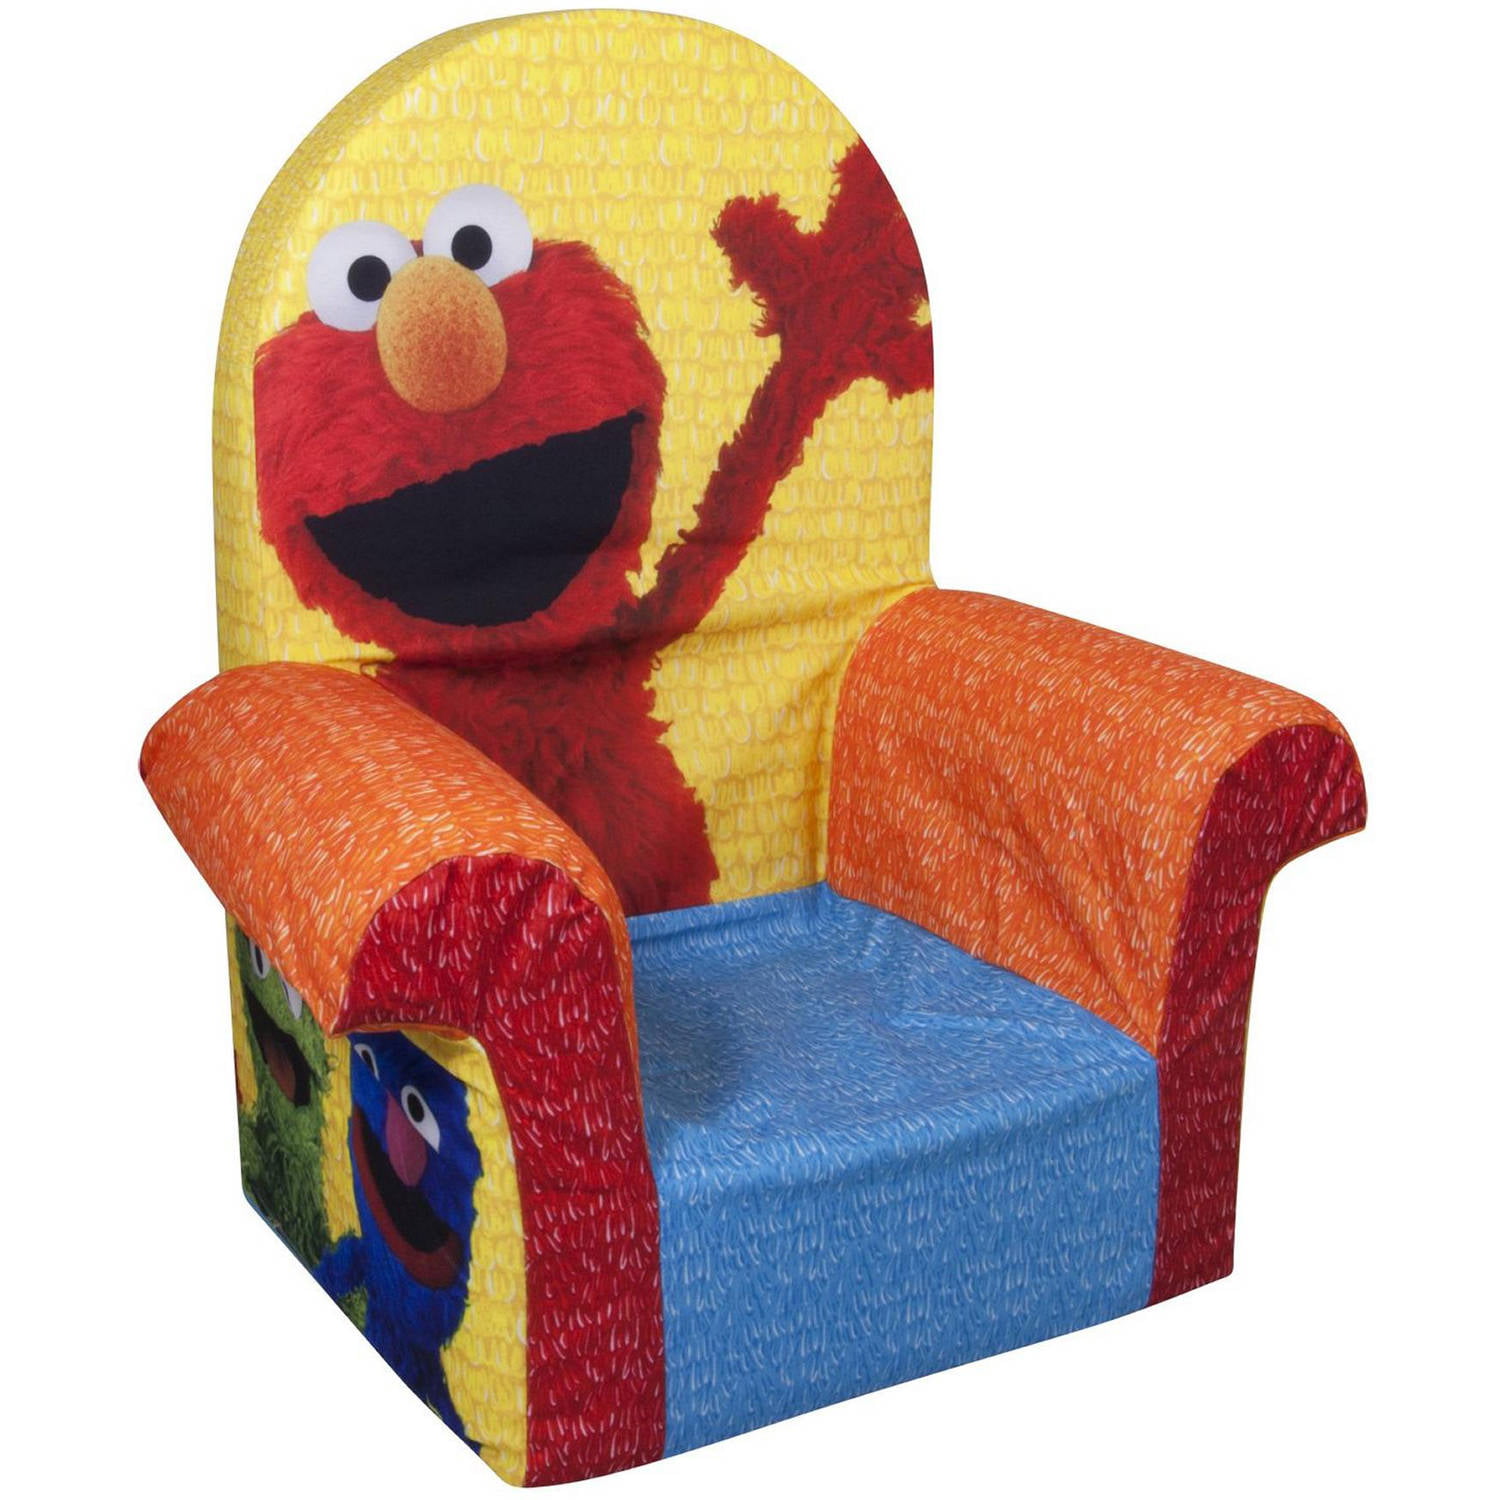 soft furniture for toddlers